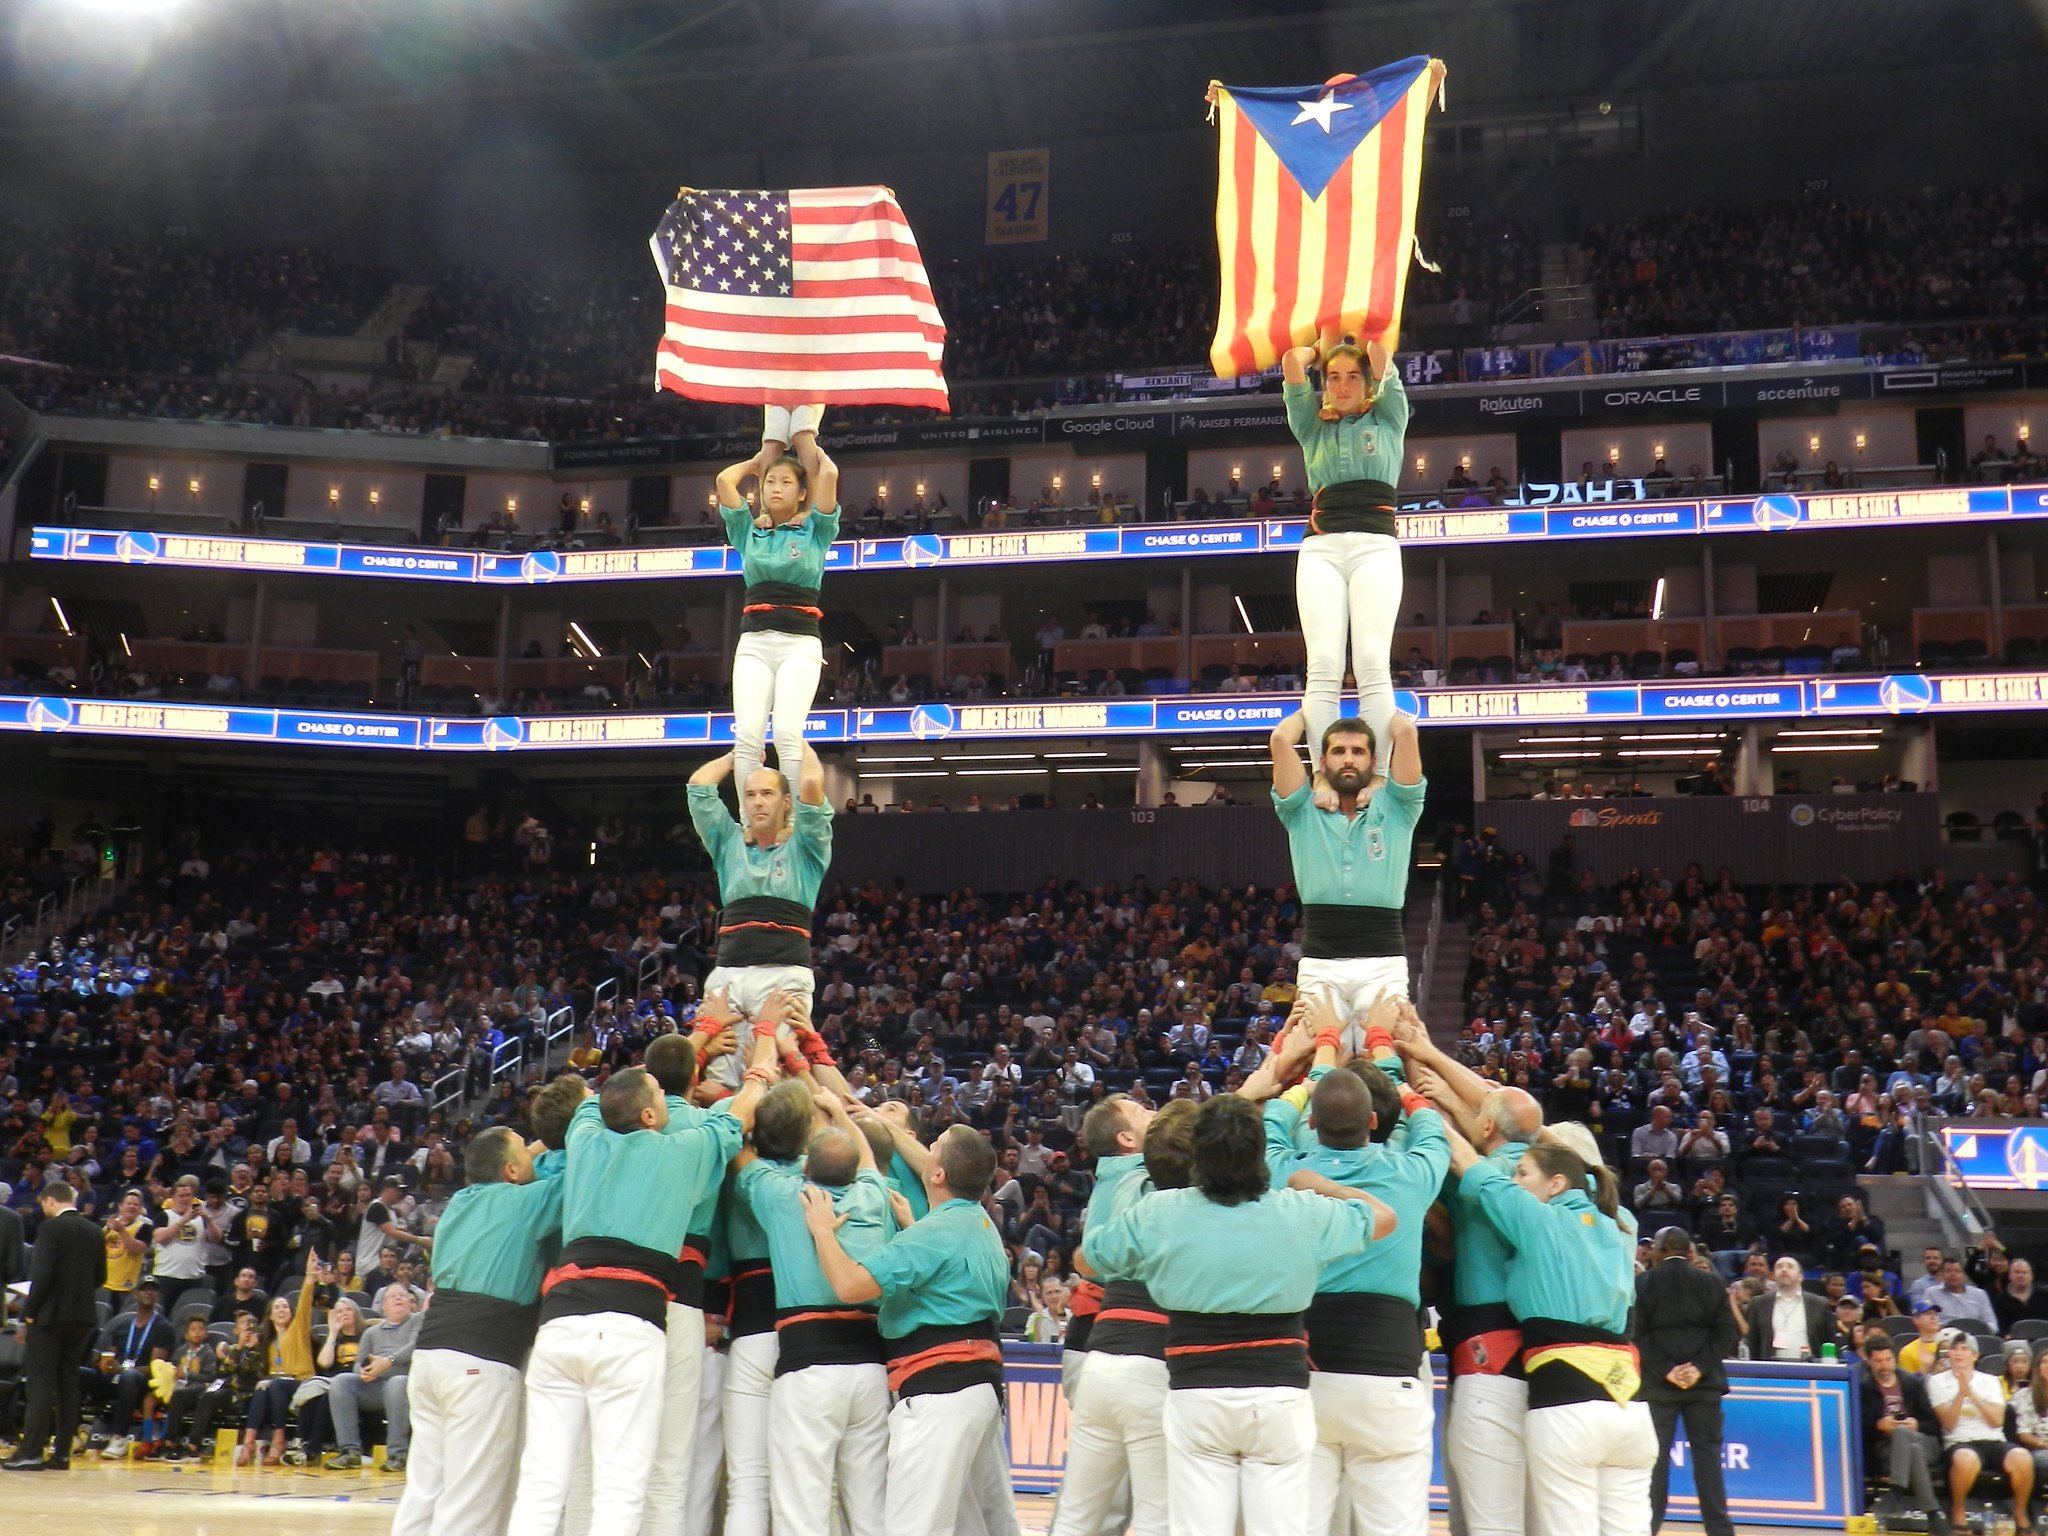 Video: Catalan human towers and a pro-independence flag in the NBA